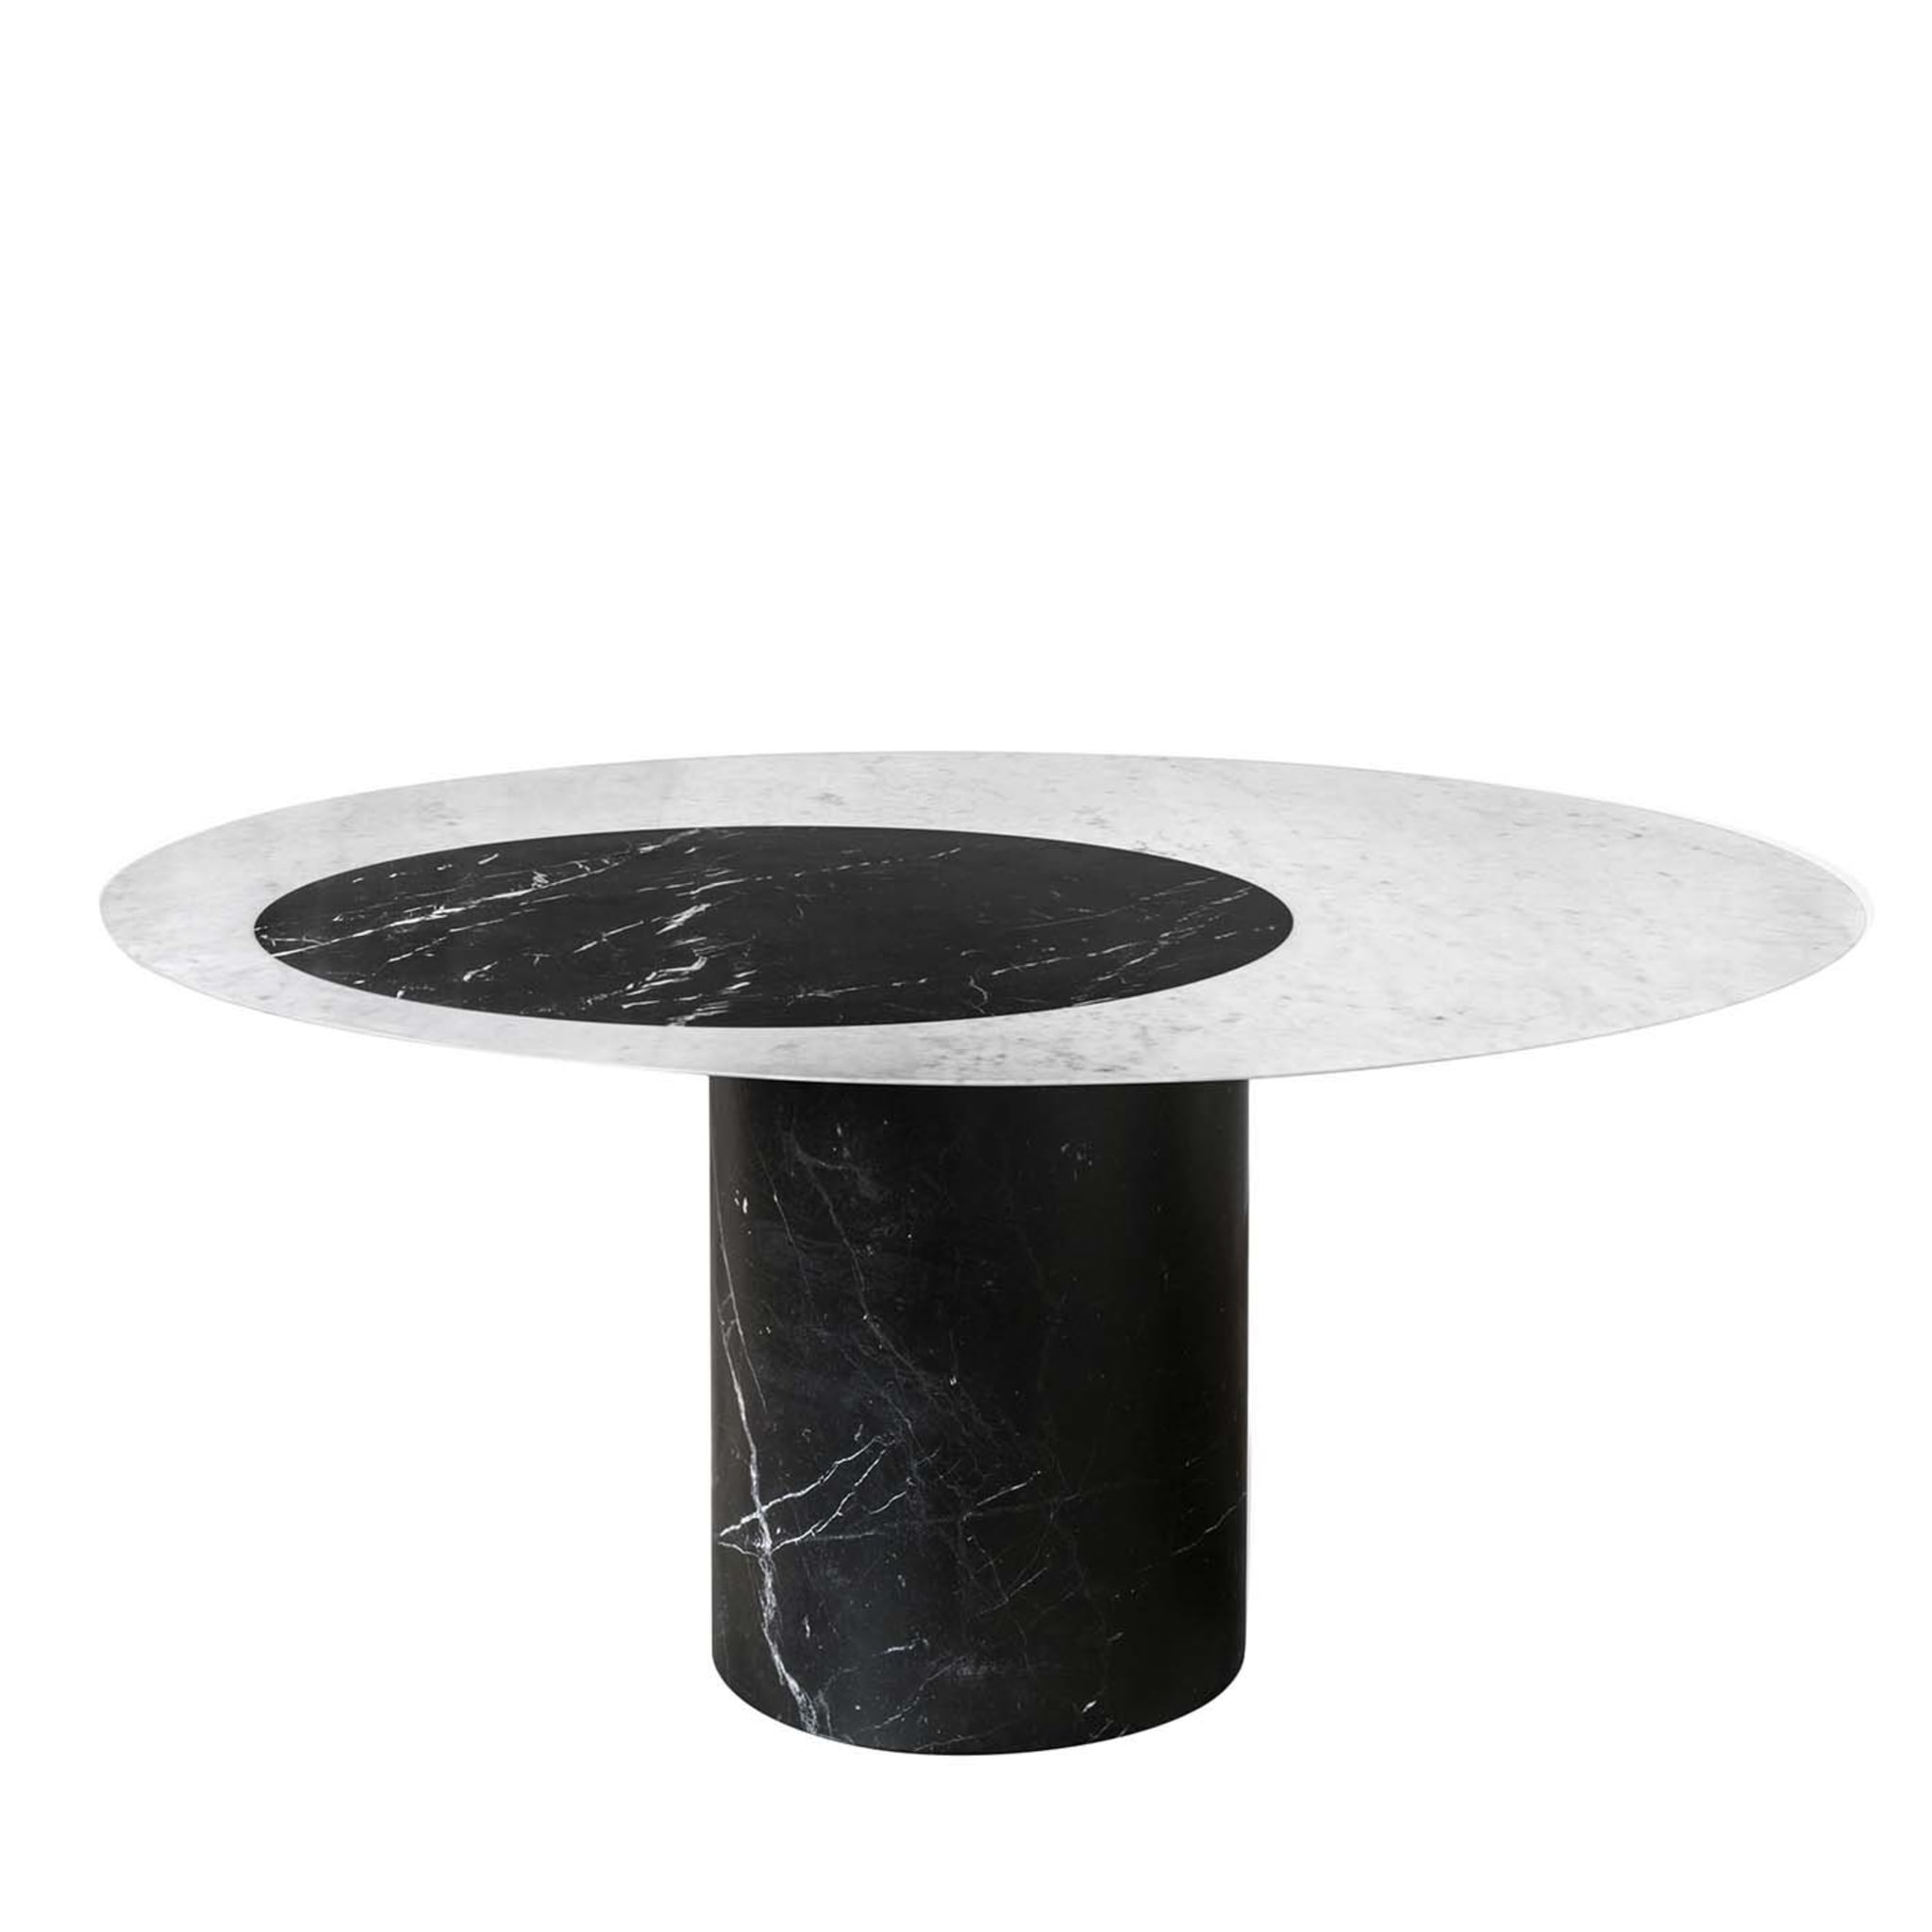 Proiezioni Round Black and White Marble Dining Table #1 by Elisa Ossino - Main view